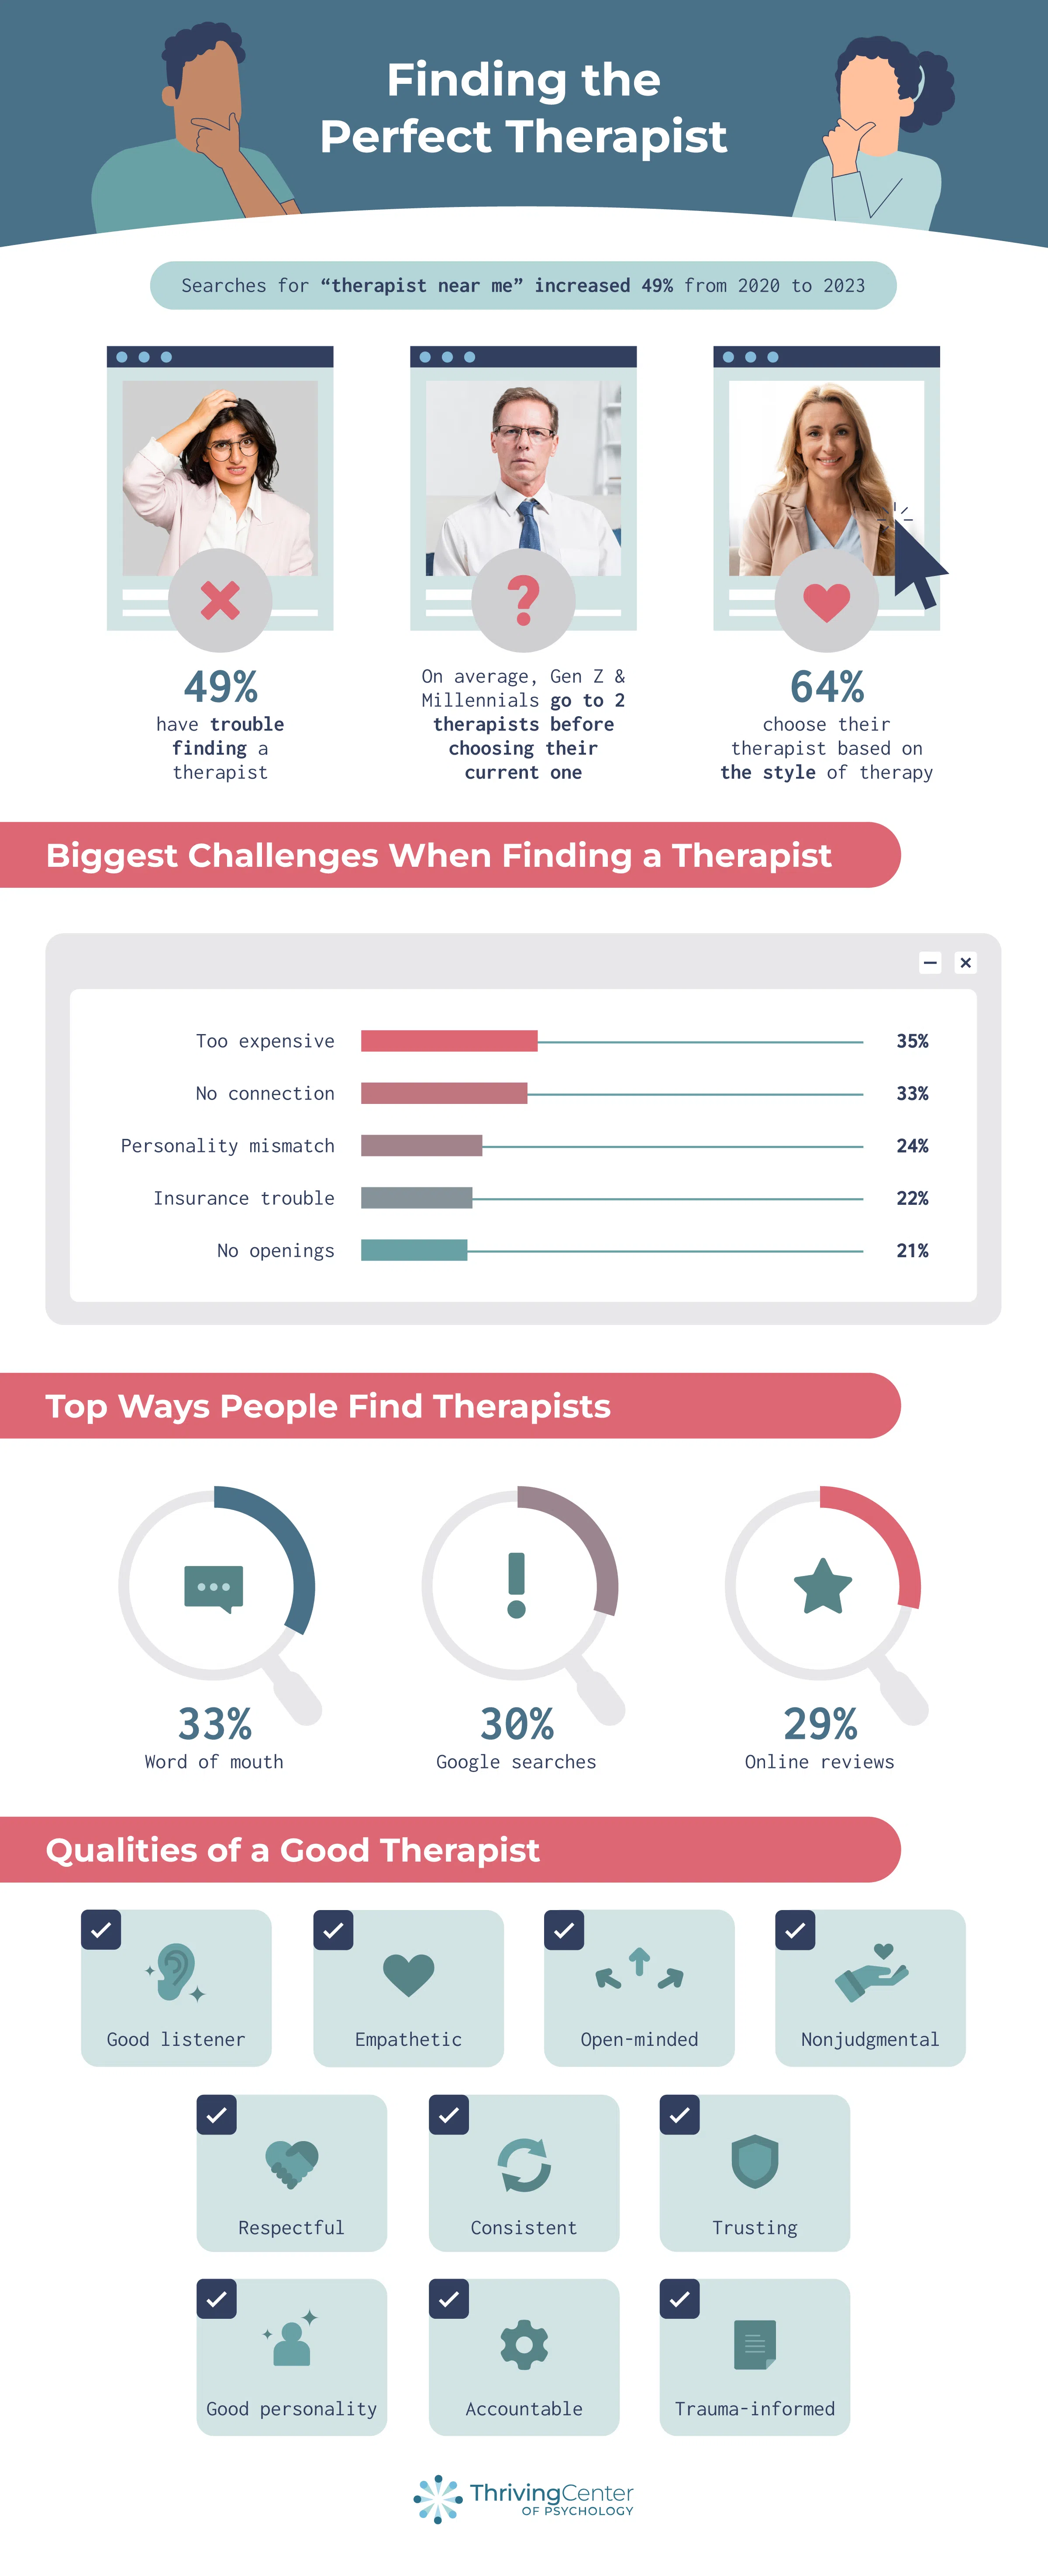 Top 5 challenges to finding a therapist and qualities of a good therapist - report by thrivingcenterofpsych.com